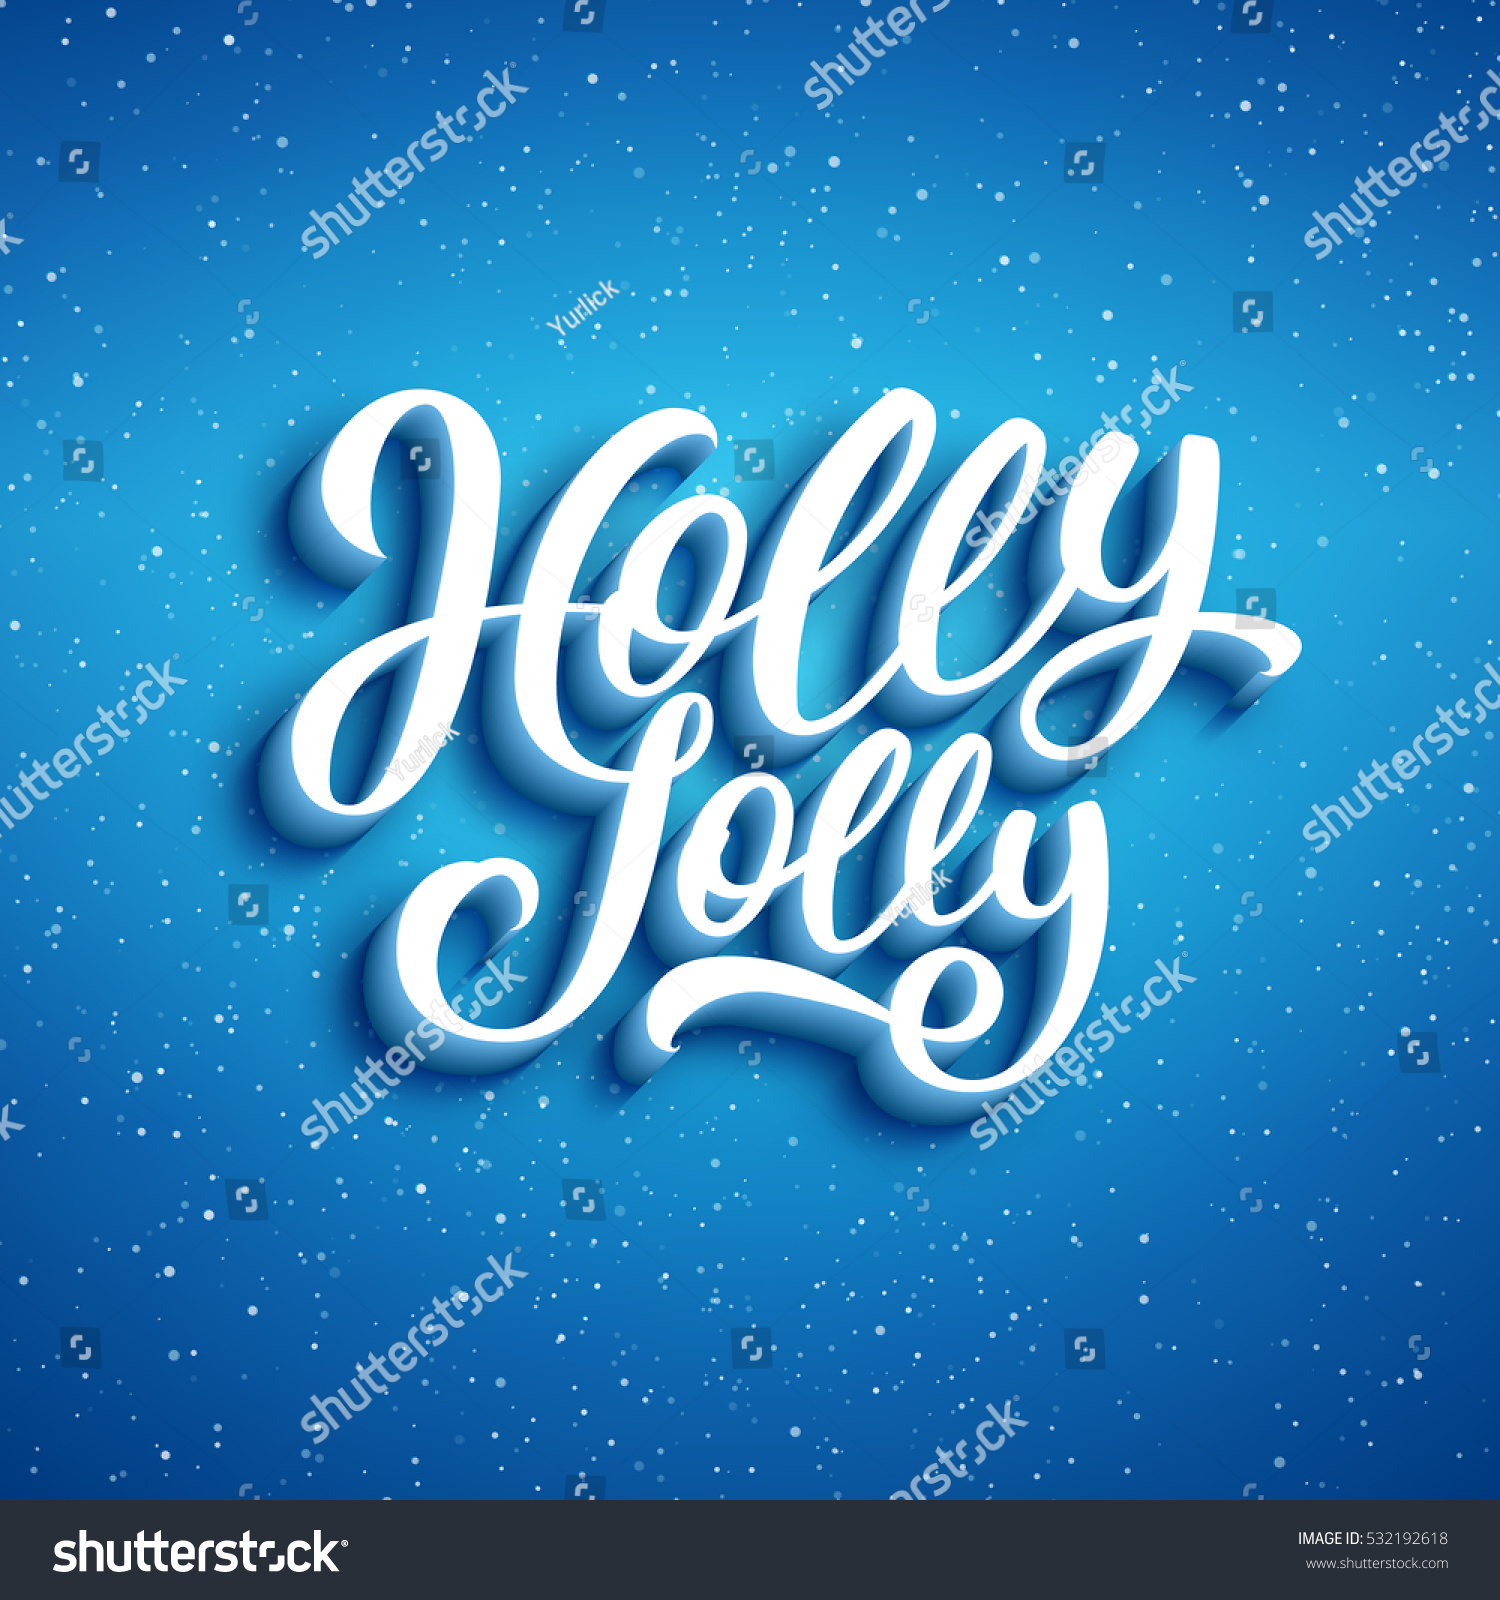 Holly Jolly lettering on blue blurry background with sparkles. Greeting card design template for Merry Christmas with 3D typography label #532192618